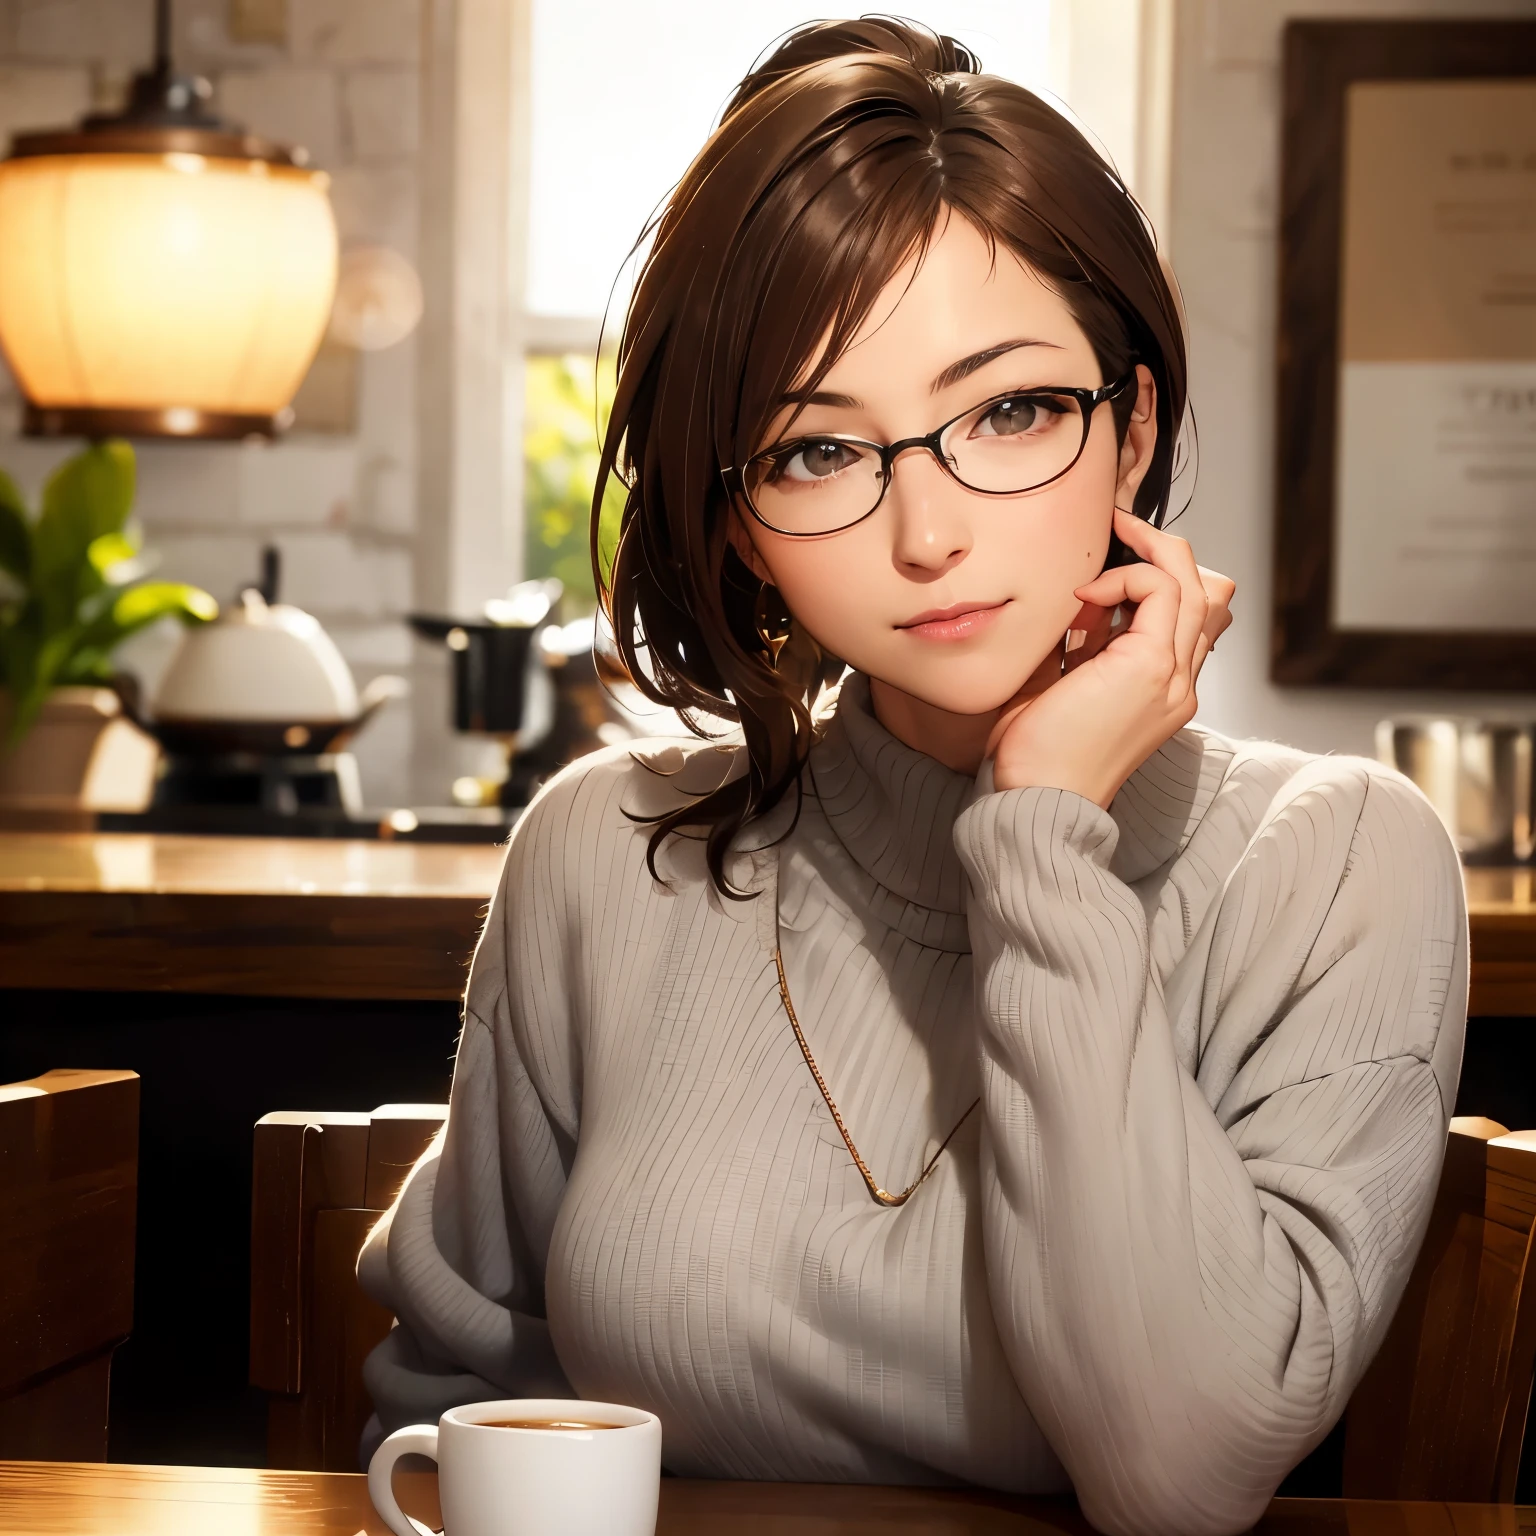 Masterpiece, top quality, 4K resolution,
sitting, enjoying a cup of coffee,
30-age woman, coffeeshop,
with a ponytail, made of brown curly hair,
wearing glasses, highlighting her beauty,
Detailed facial features, natural skin texture,
acute, anatomically correct,
Glasses framing her pretty face,
sharp focus on her expressive eyes,
brown irises expressing a hint of tiredness and contentment,
Lip gloss subtly enhancing her lips,
dressed smartly in a blouse and skirt,
coffee mug in hand with a warm beige h